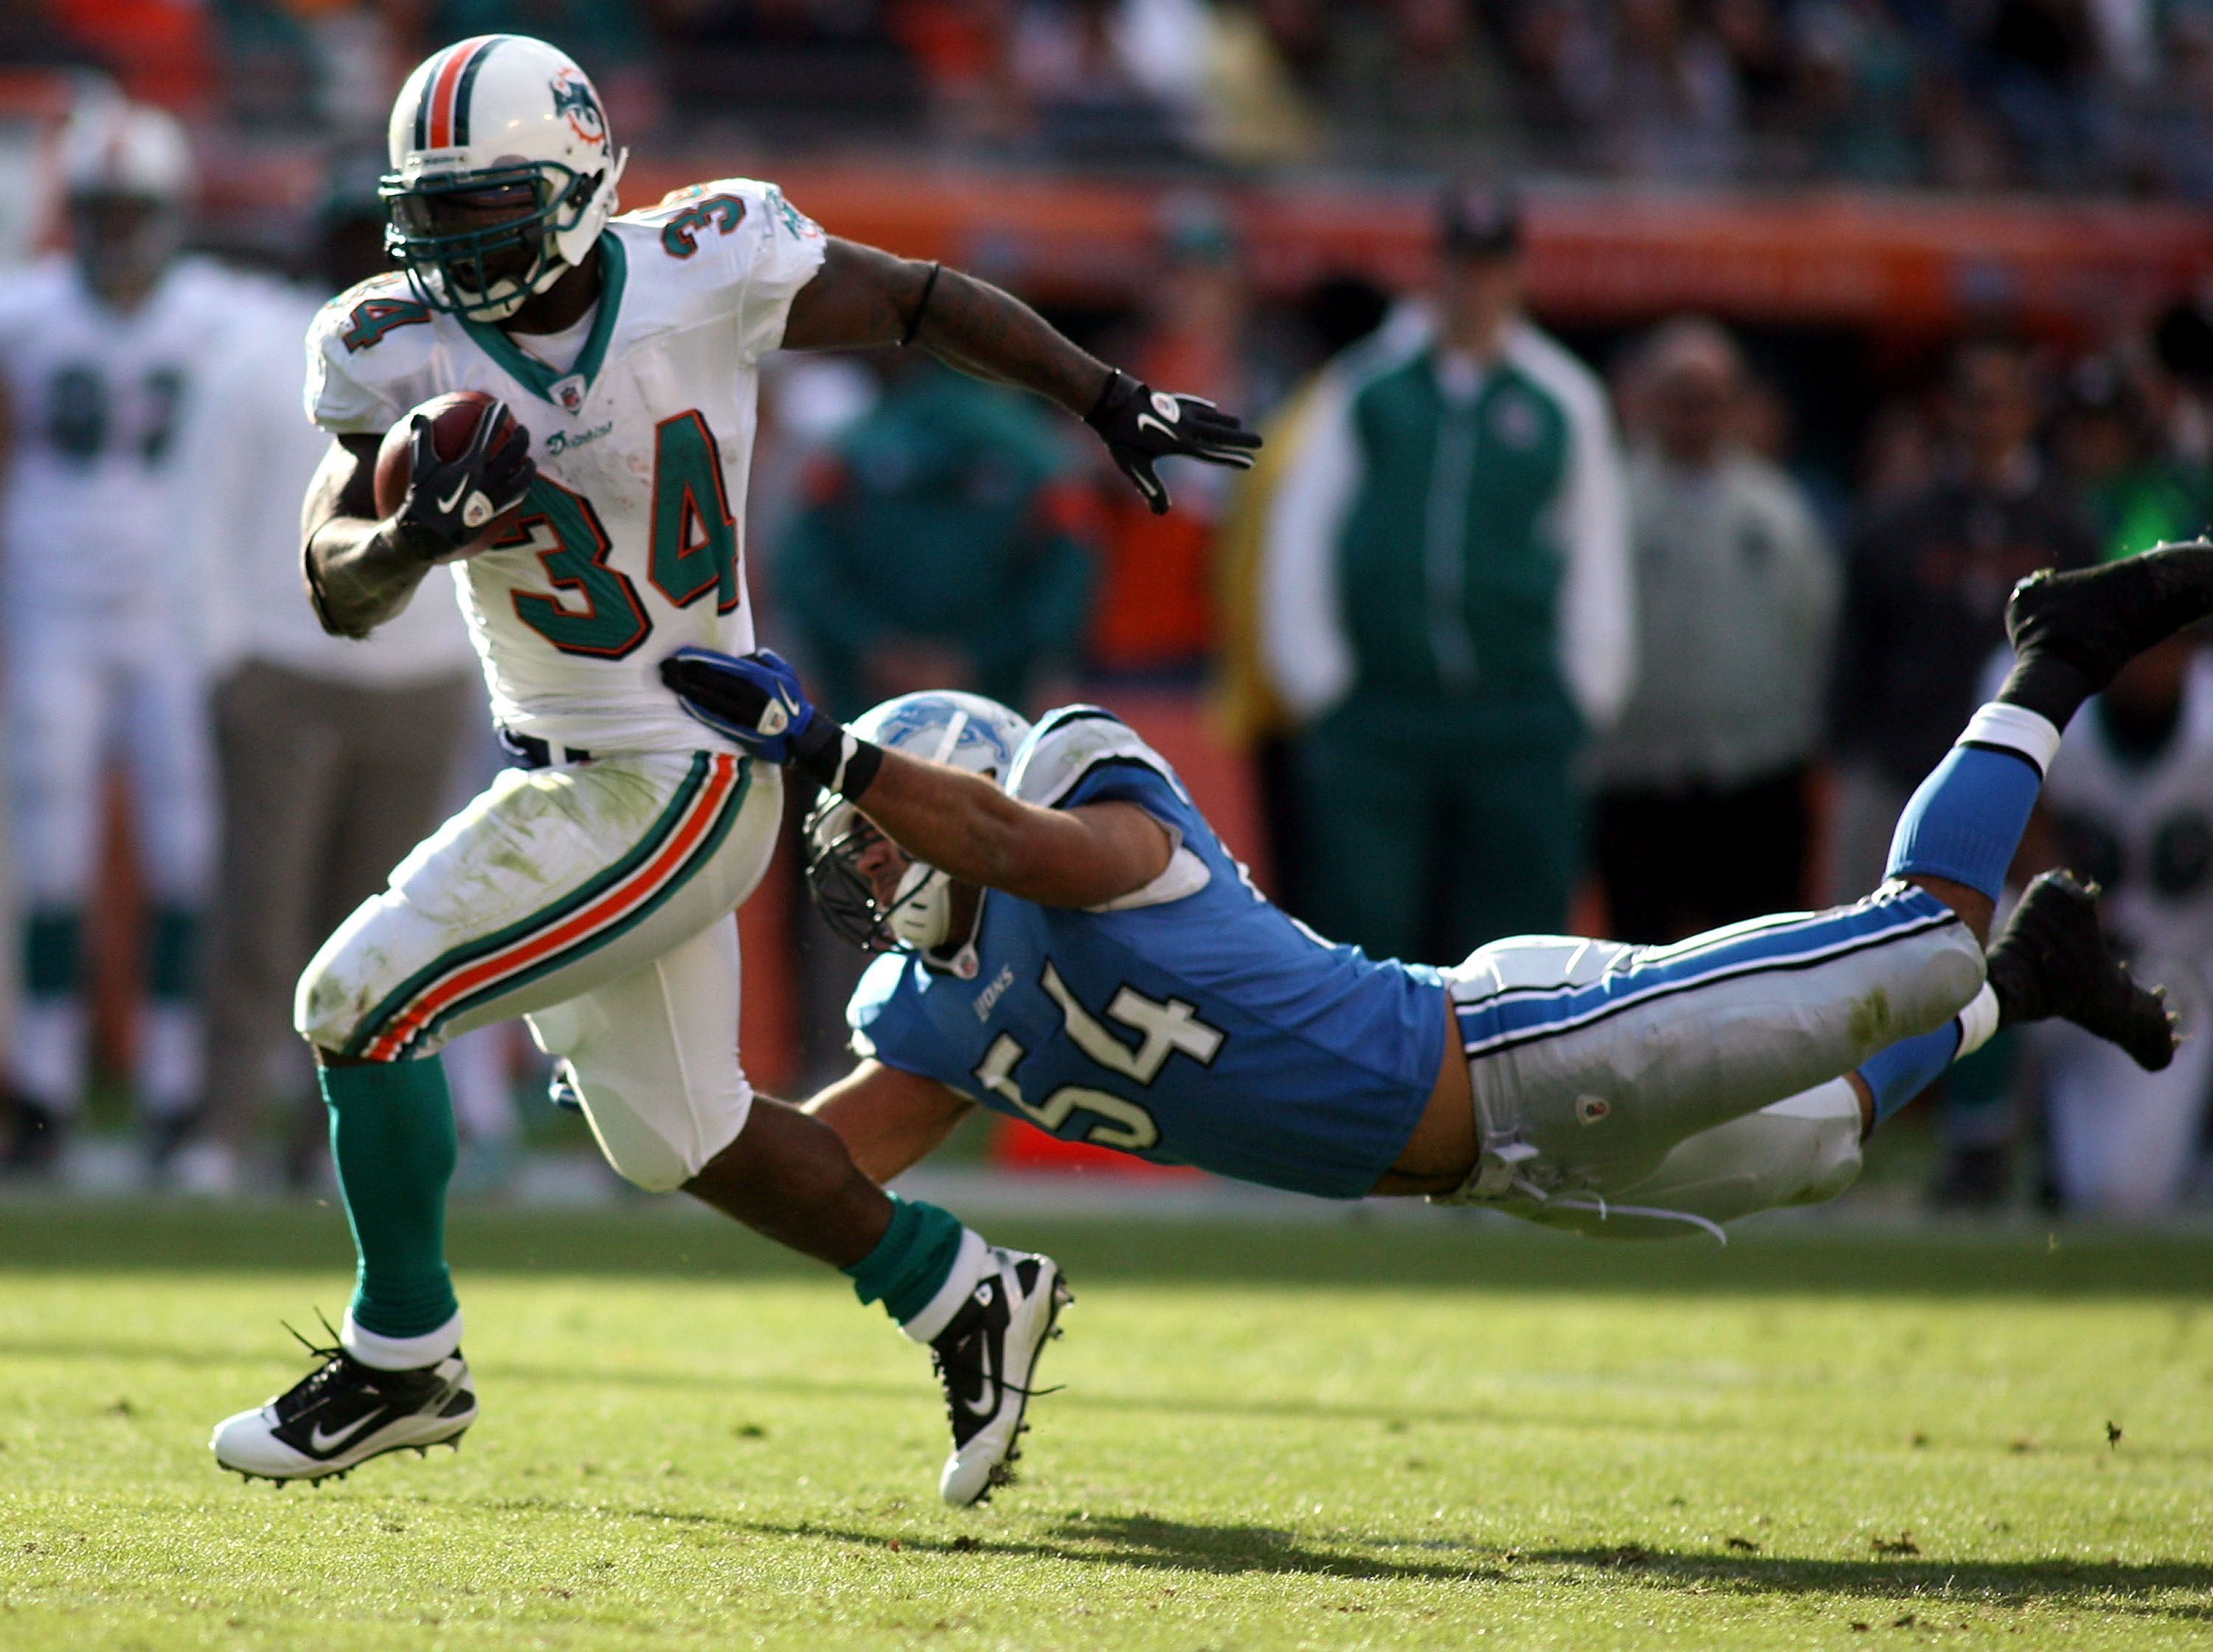 MIAMI - DECEMBER 26:  Running back Ricky Williams #34 of the Miami Dolphins breaks away from linebacker DeAndre Levy #54 of the Detroit Lions at Sun Life Stadium on December 26, 2010 in Miami, Florida. The Lions defeated the Dolphins 34-27.  (Photo by Mar